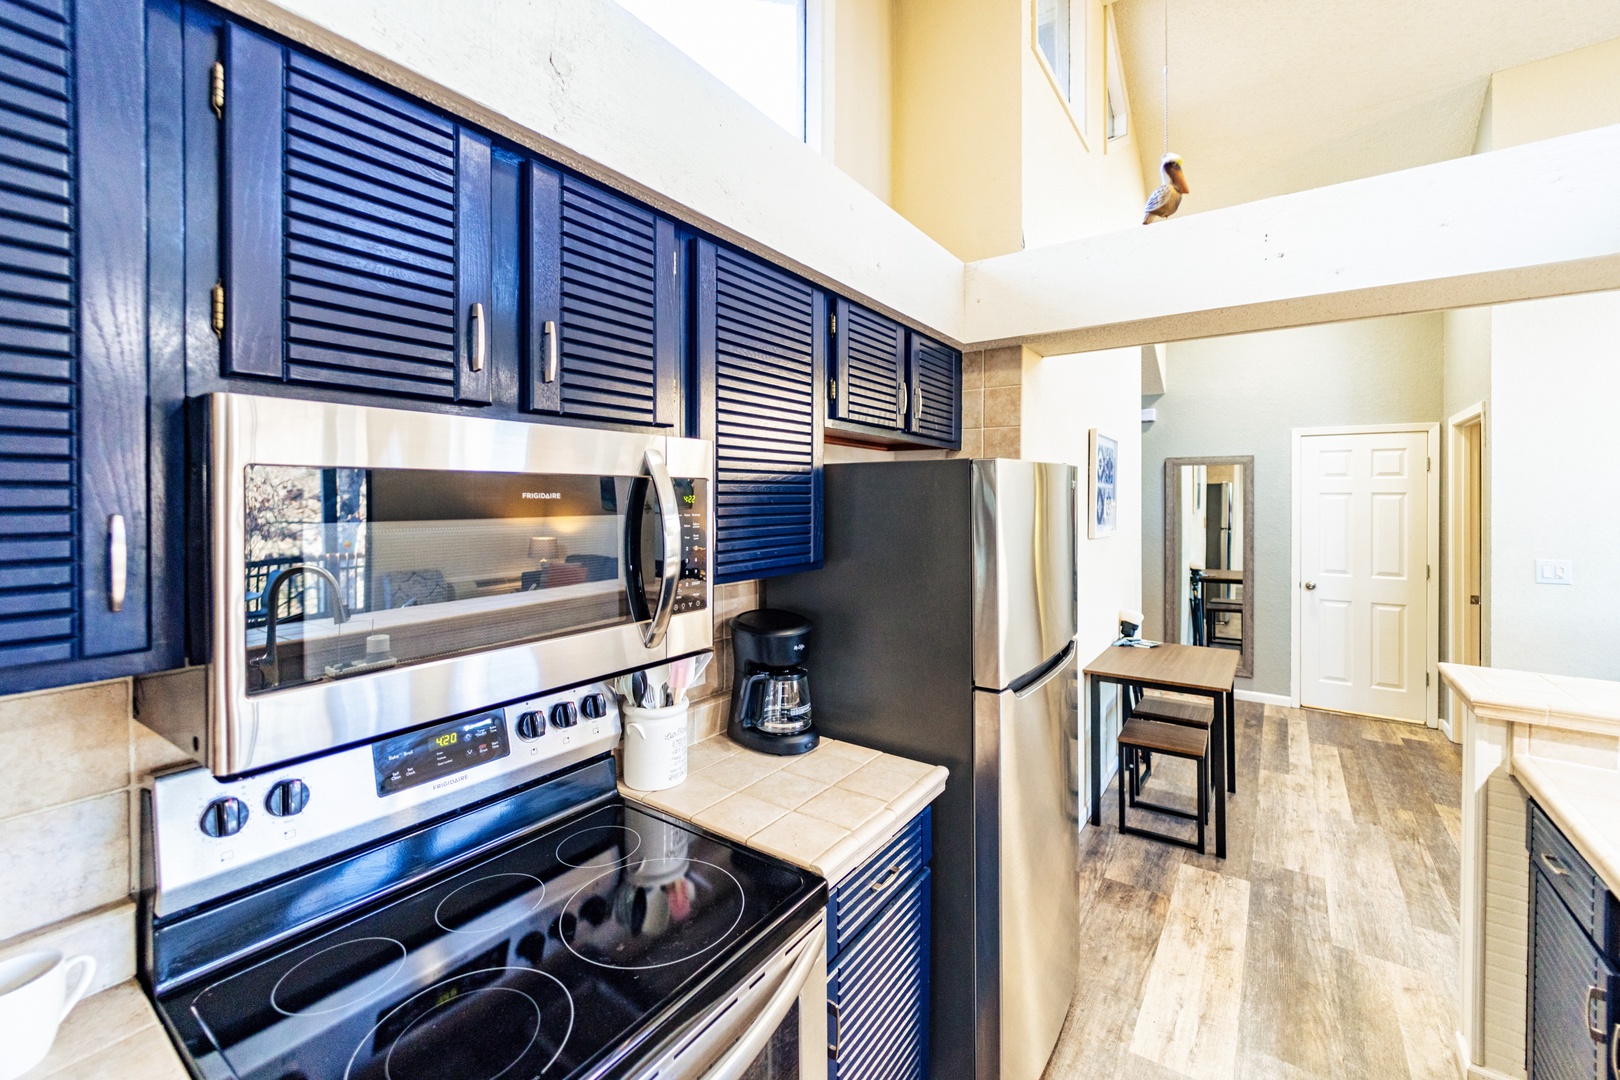 The airy, open kitchen offers ample space & all the comforts of home